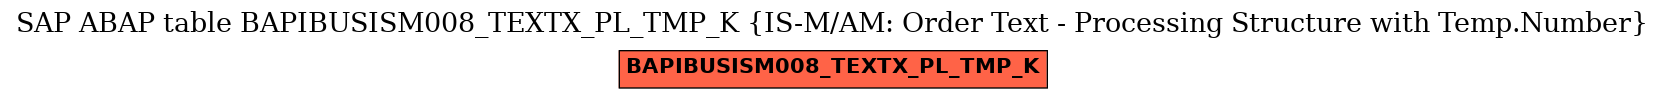 E-R Diagram for table BAPIBUSISM008_TEXTX_PL_TMP_K (IS-M/AM: Order Text - Processing Structure with Temp.Number)